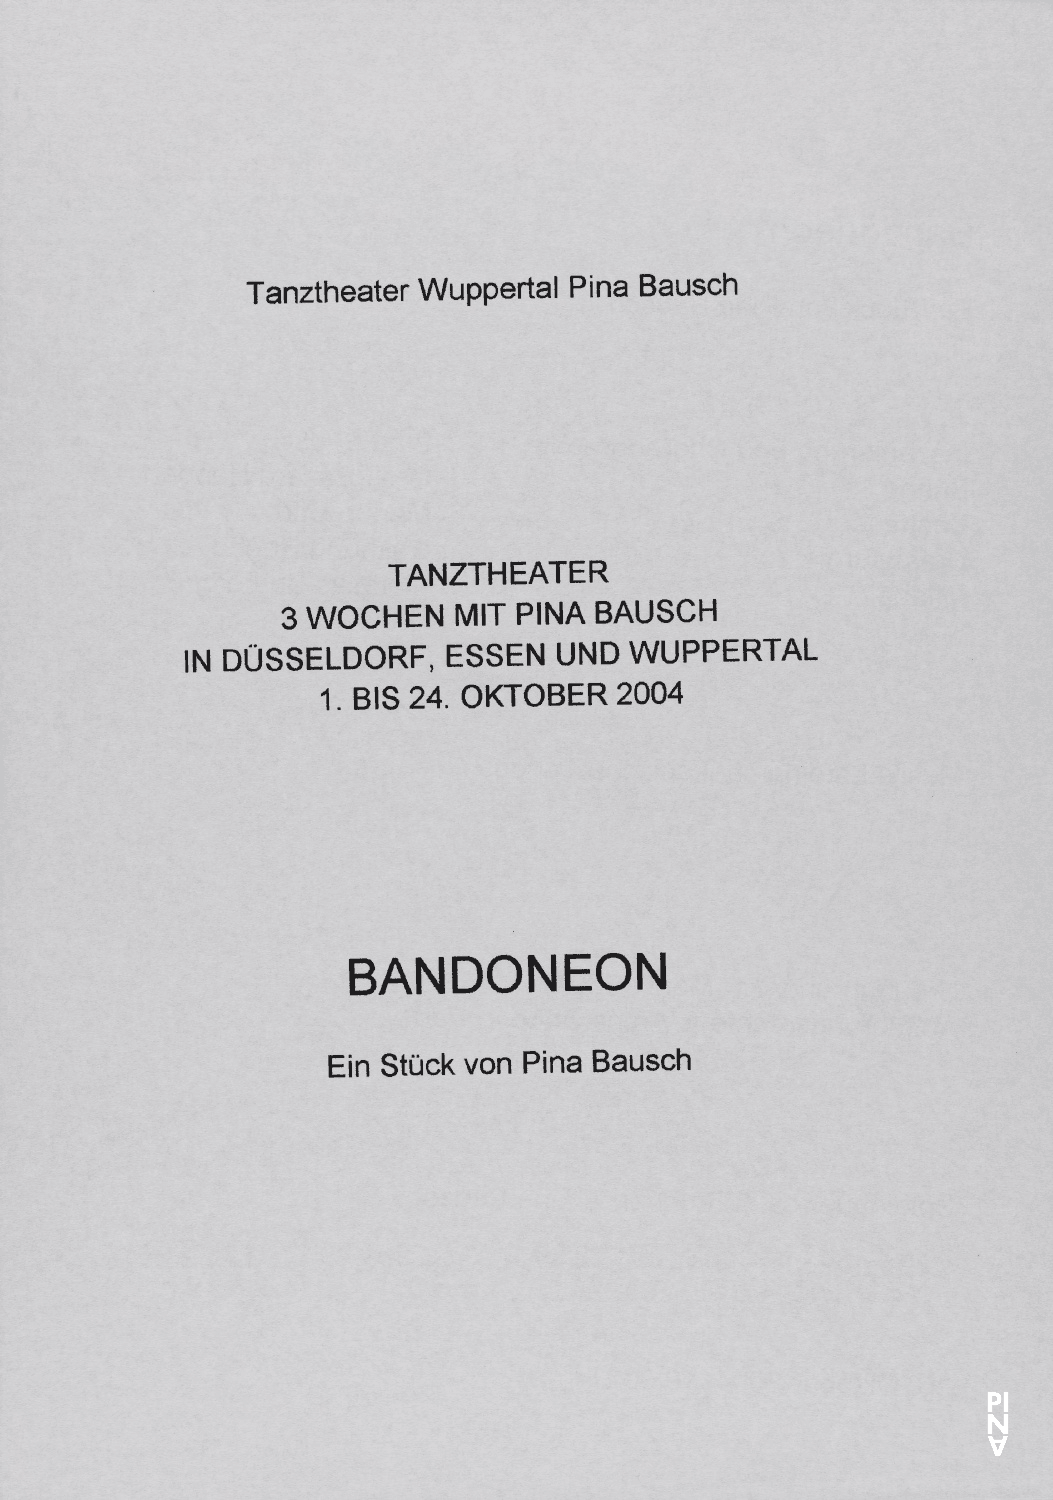 Evening leaflet for “Bandoneon” by Pina Bausch with Tanztheater Wuppertal in in Wuppertal, Oct. 16, 2004